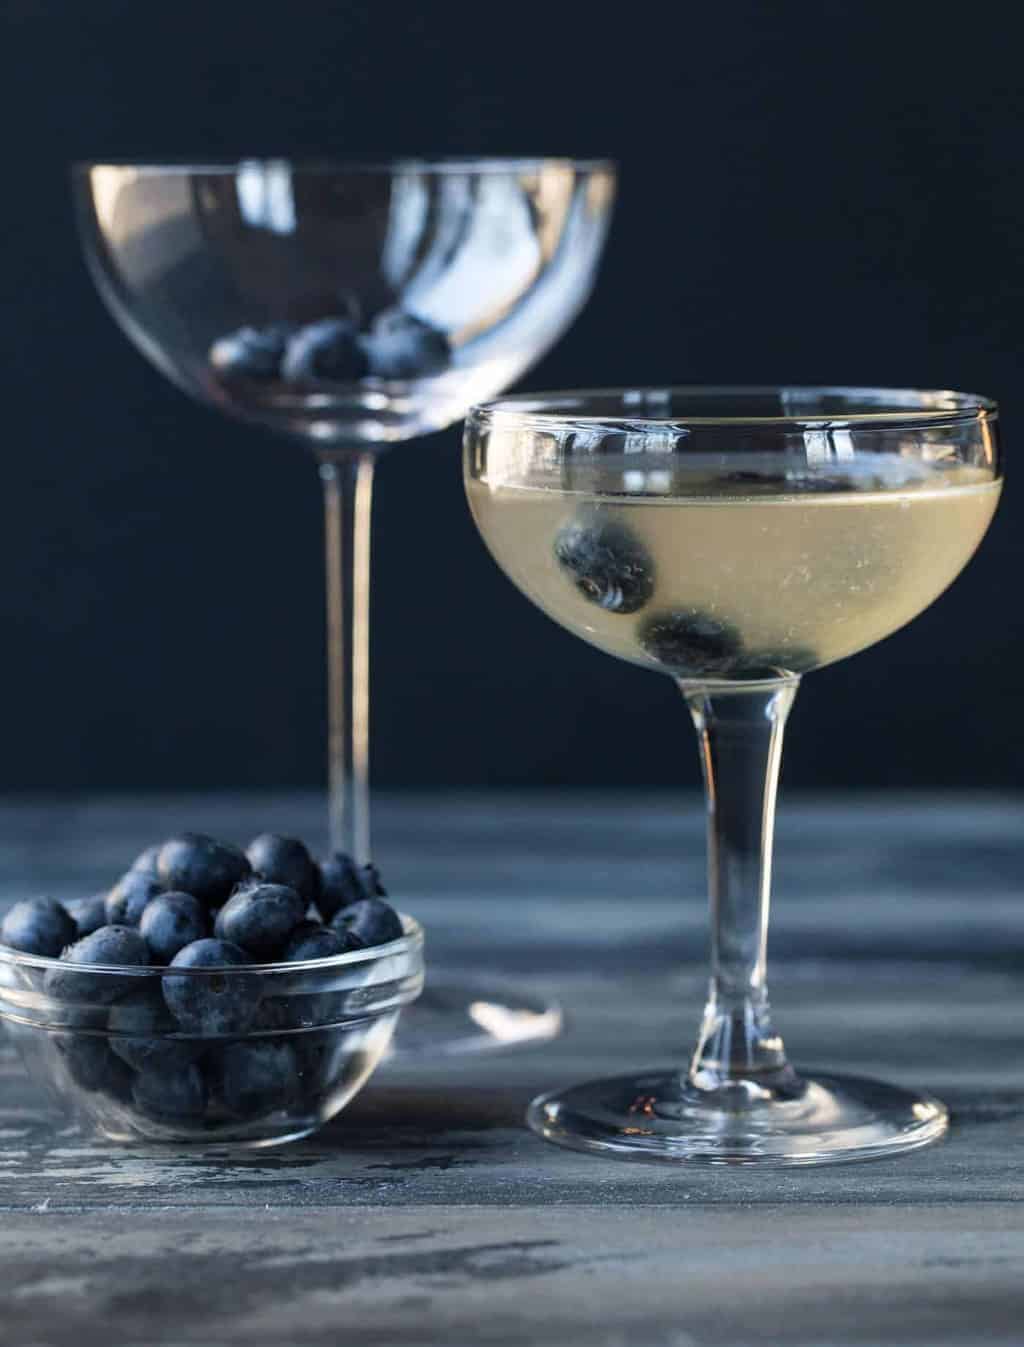  Martini is a coupe glass with blueberry floating in it for garnish.